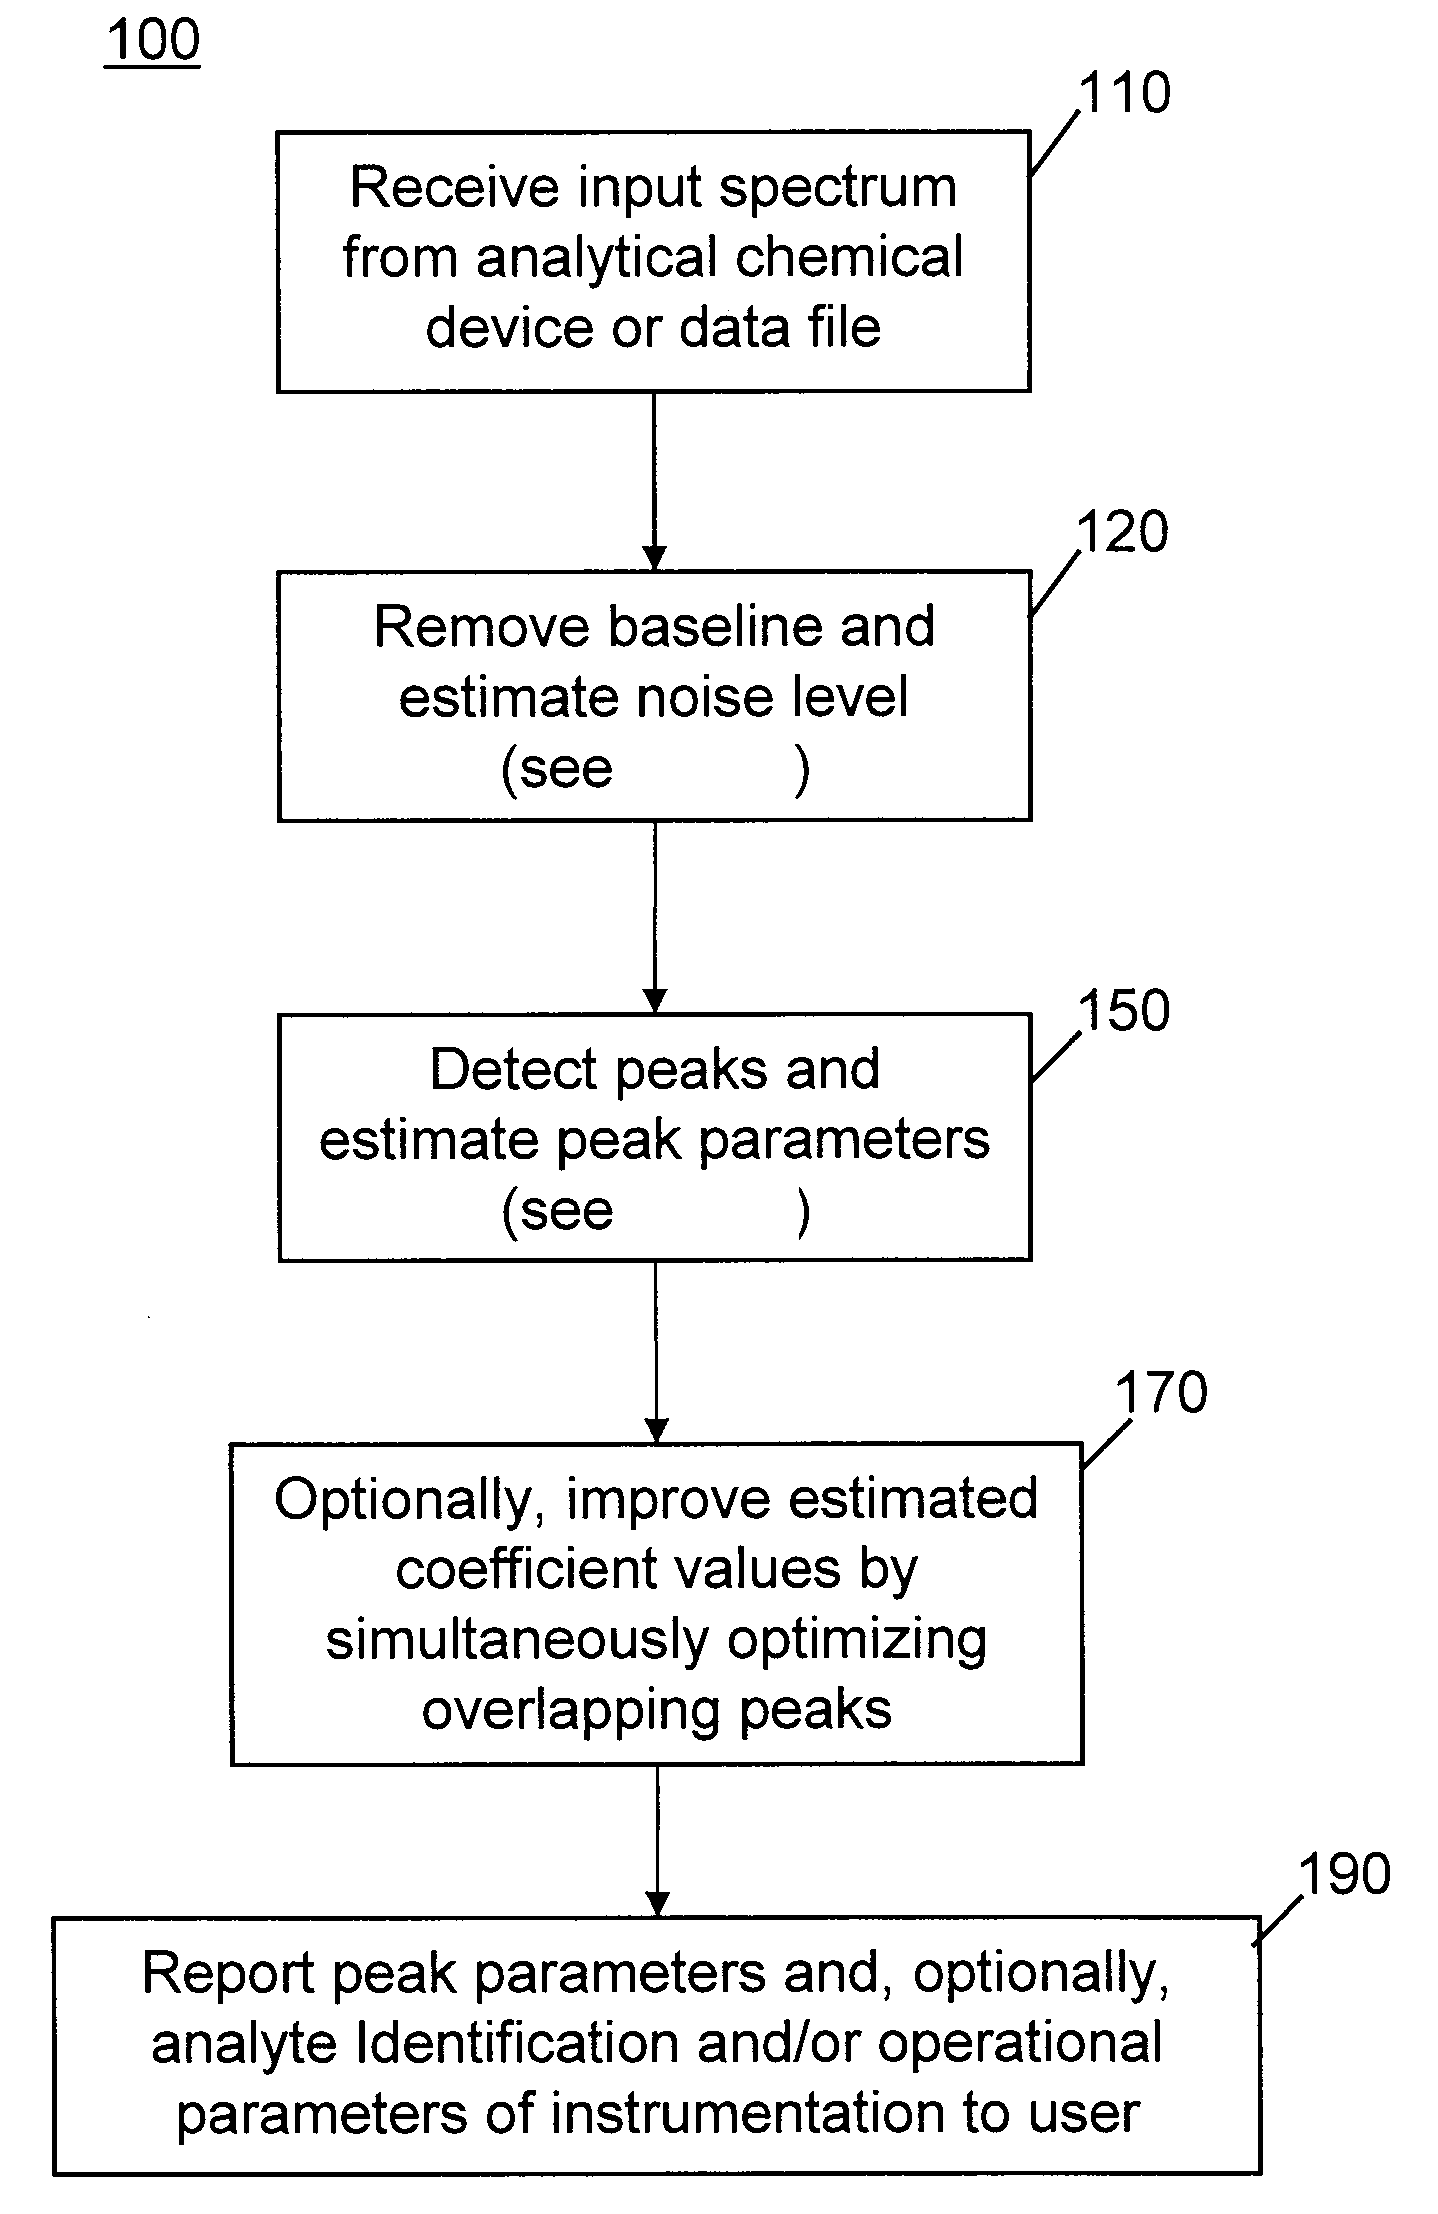 Methods of automated spectral peak detection and quantification without user input